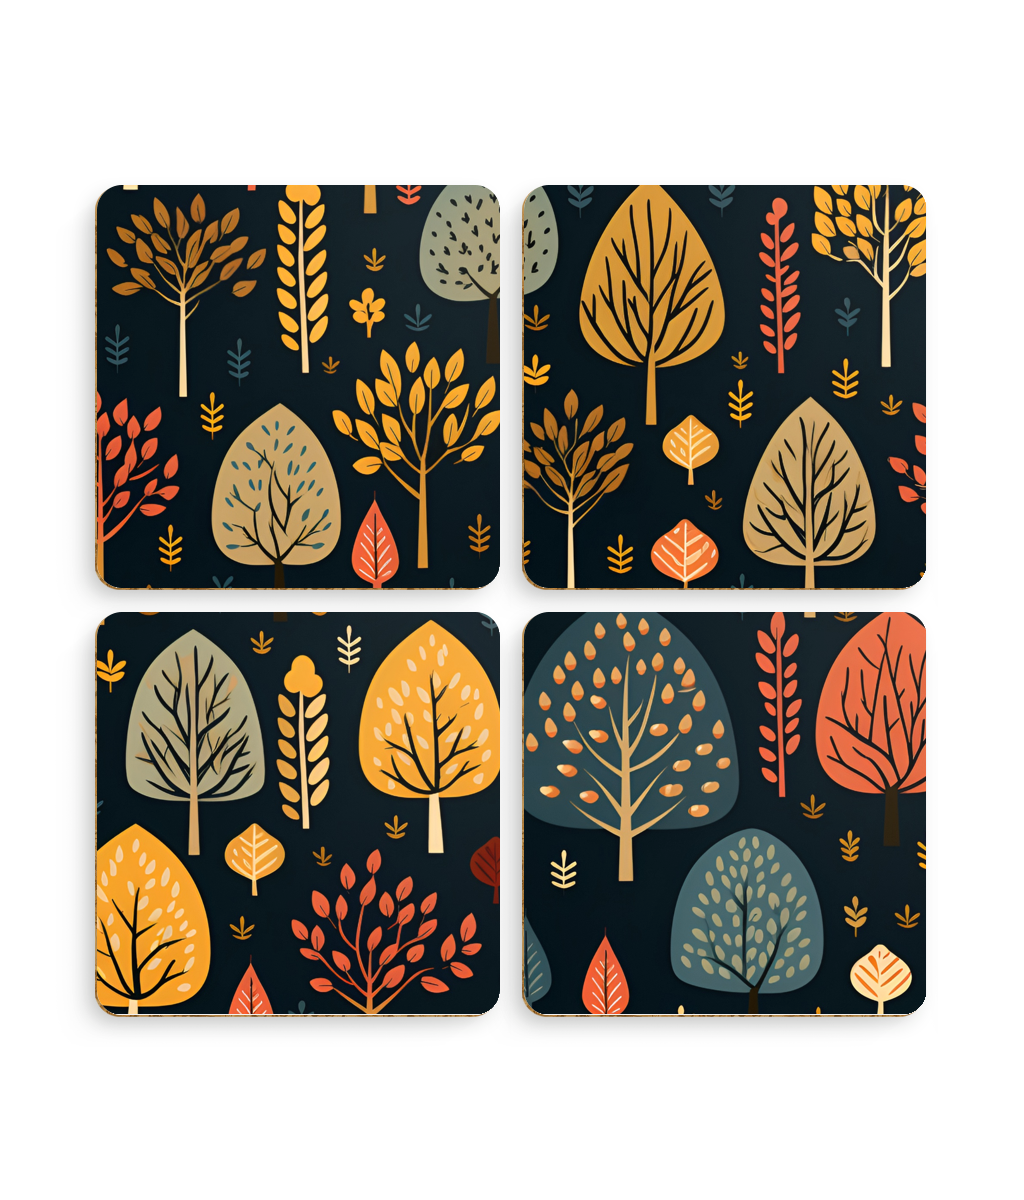 Mid-Century Mosaic: Dappled Leaves and Folk Imagery - Pack of 4 Coasters